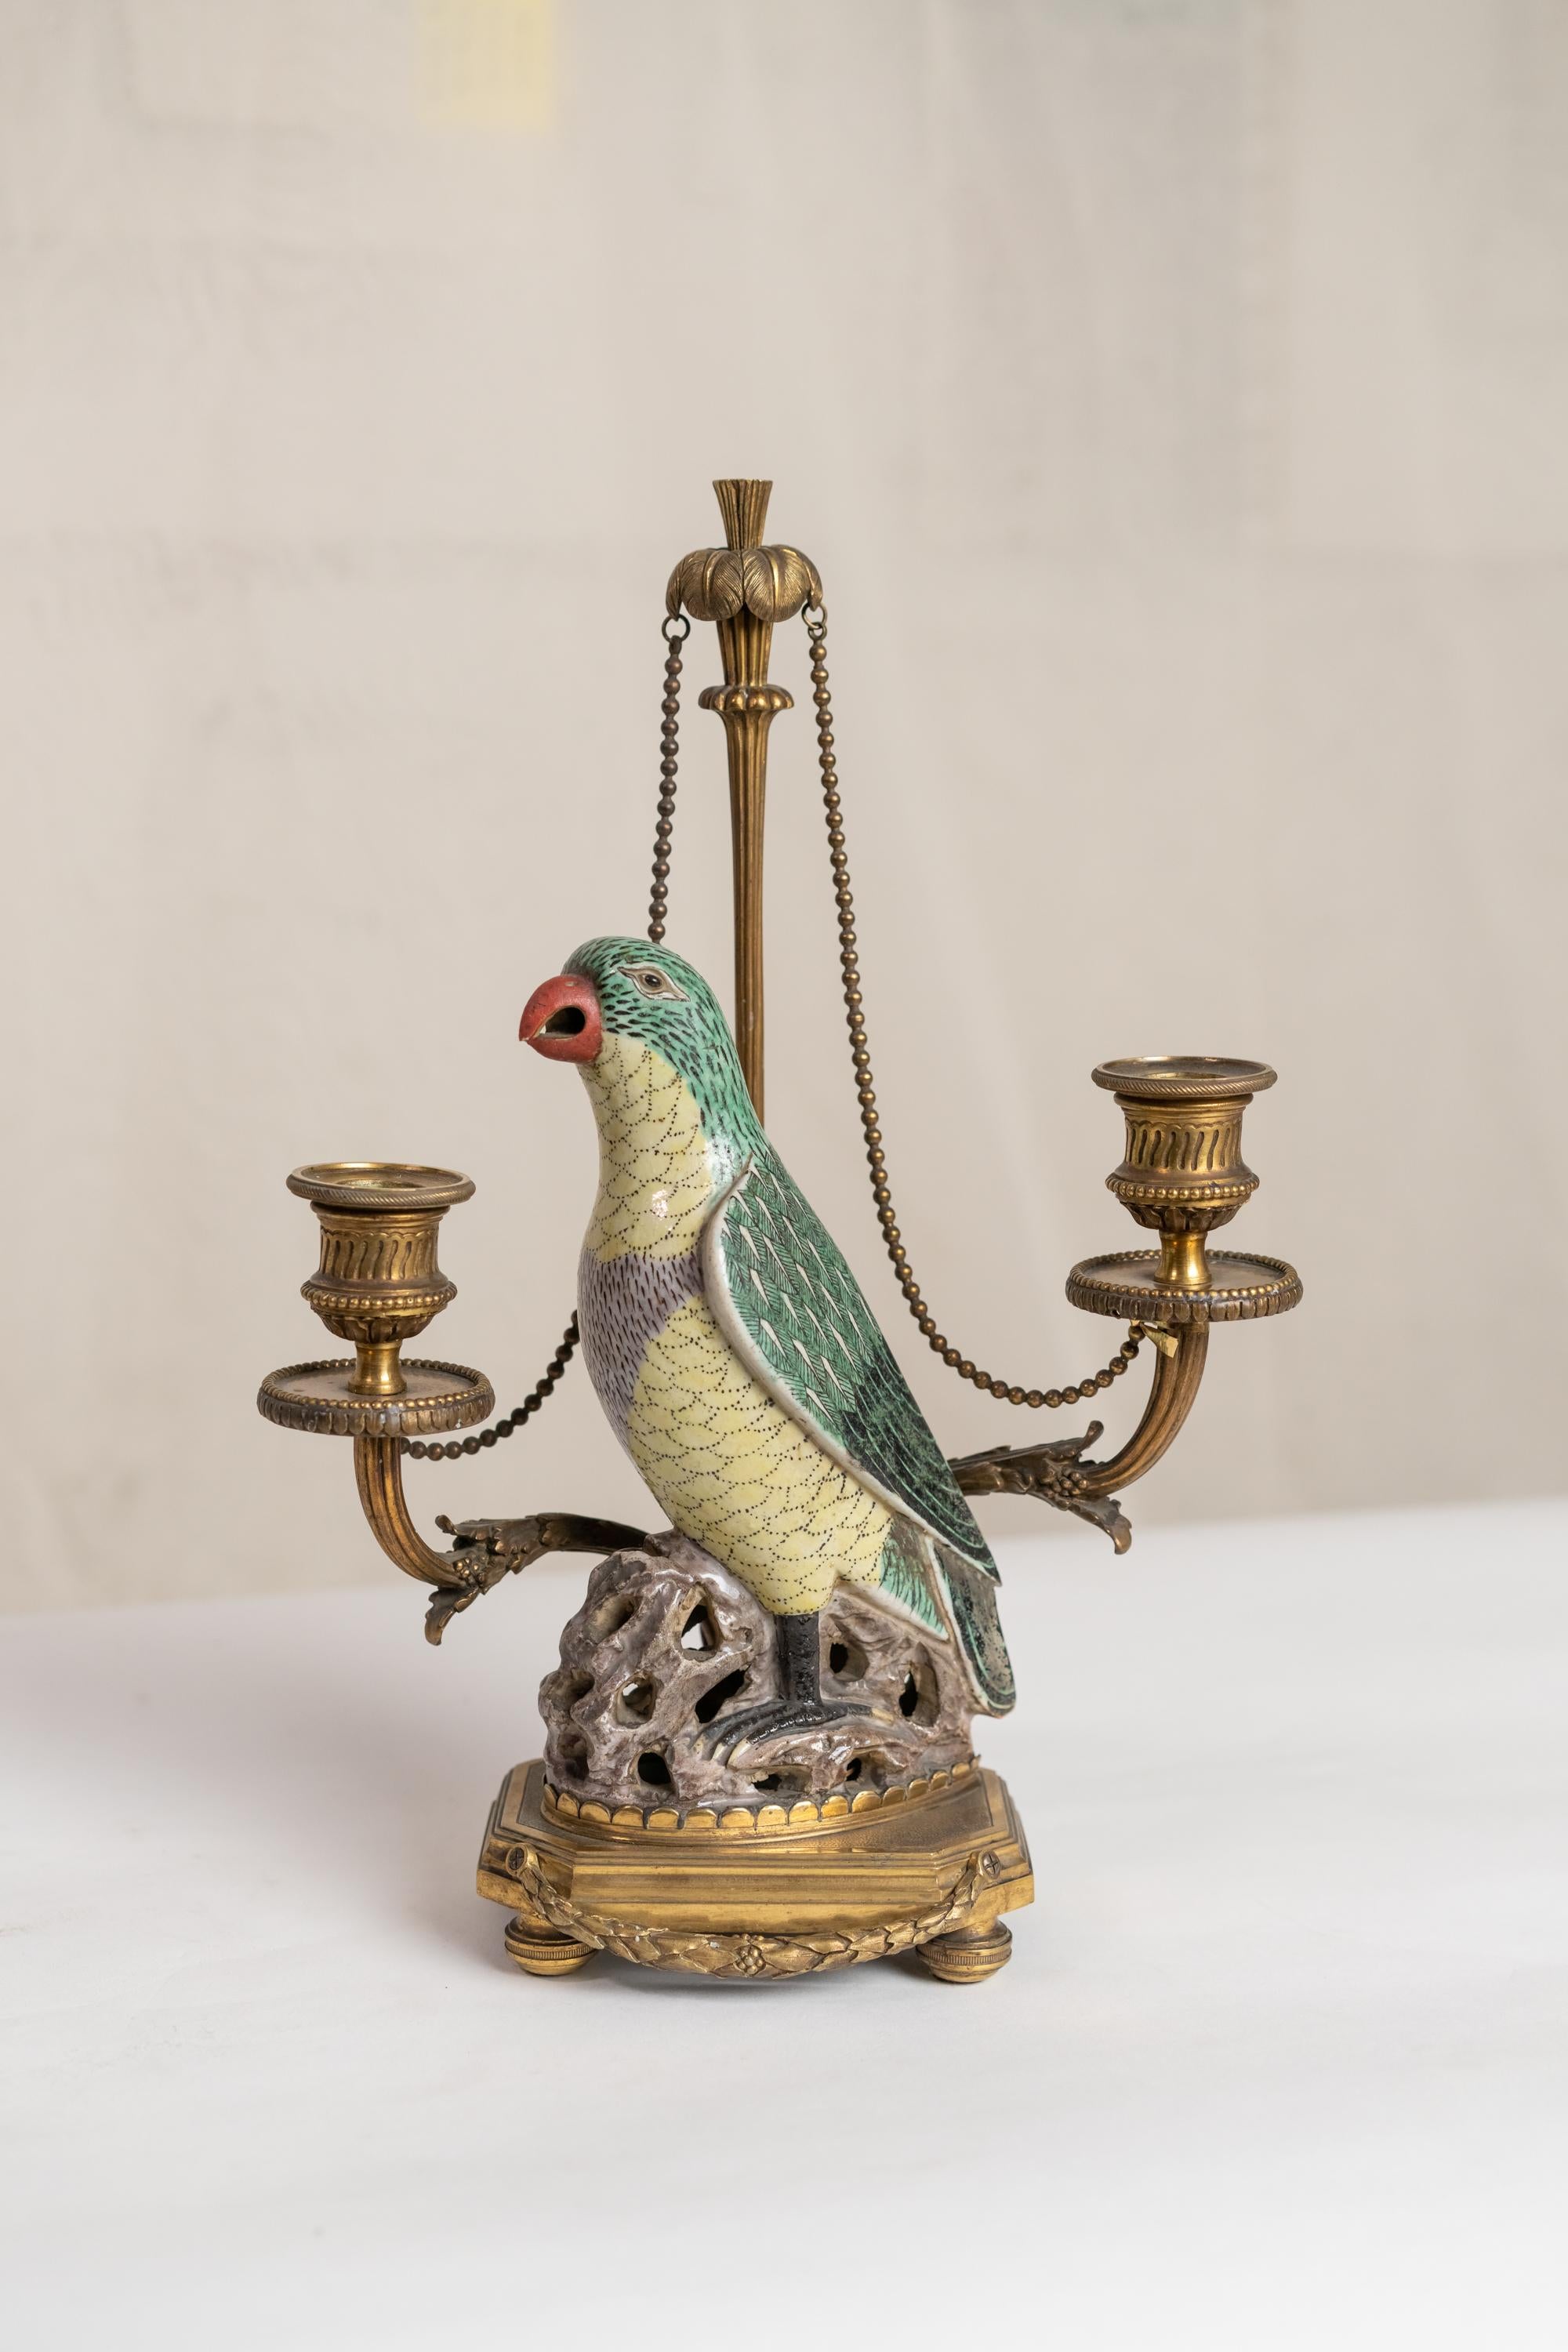 Early 19th Century Rare Pair of 18th Century-19th Century Chinese Porcelain Parrots Candelabra For Sale